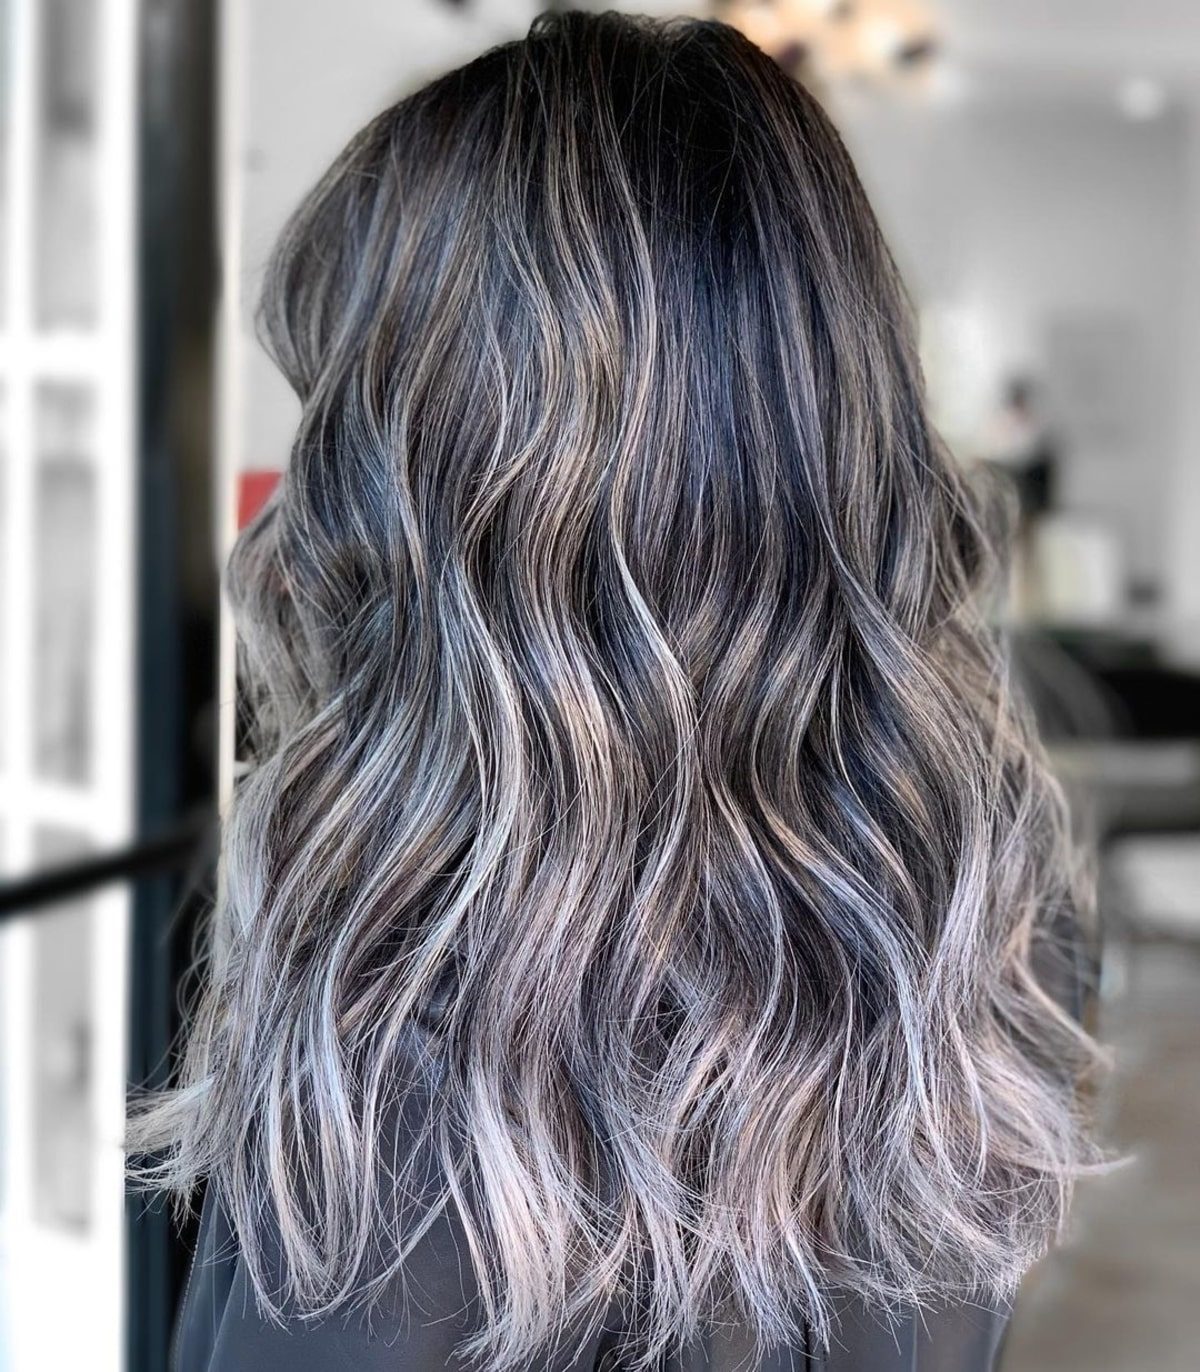 30 Amazing Examples of Dark Hair with Highlights for Incredible Contrast